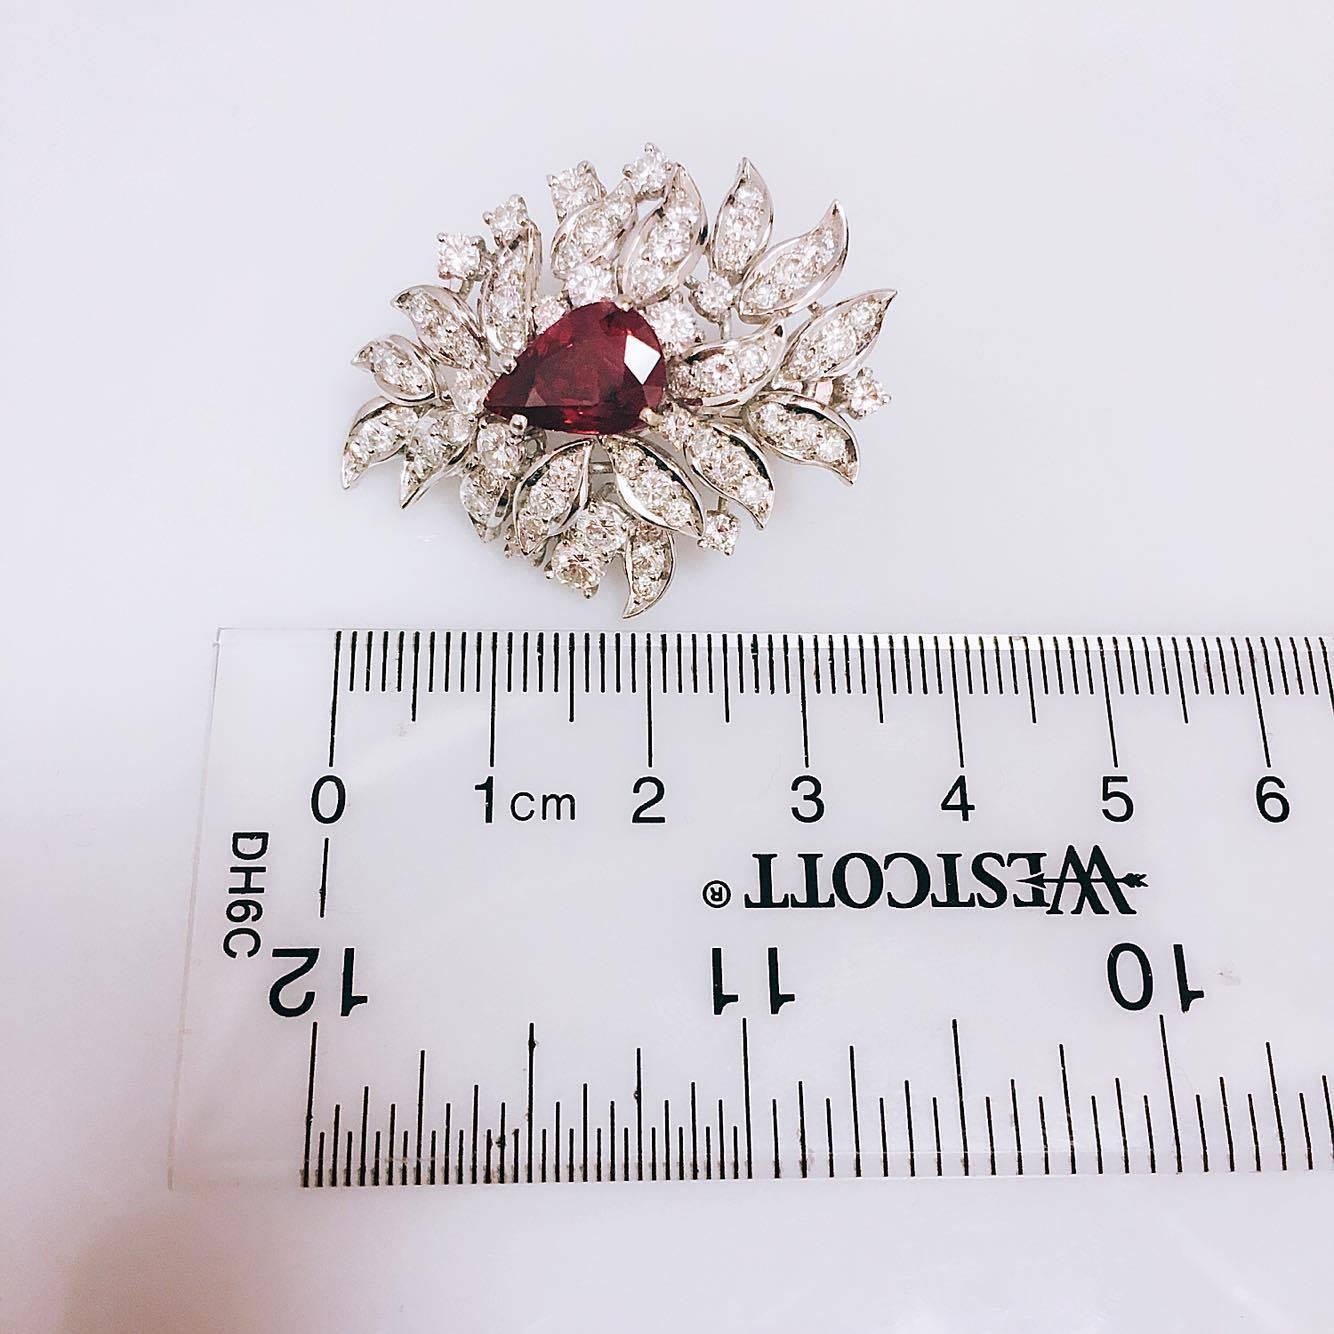 2 Pear shape Rubies weighing 6.12cts t.w. 
7.30cts t.w. Diamonds F Color VVS1 Clarity 

These amazing earrings are hand made and do not have a post. They are Clip on for ears without a piercing. However we can easily add a post and clip for pierced